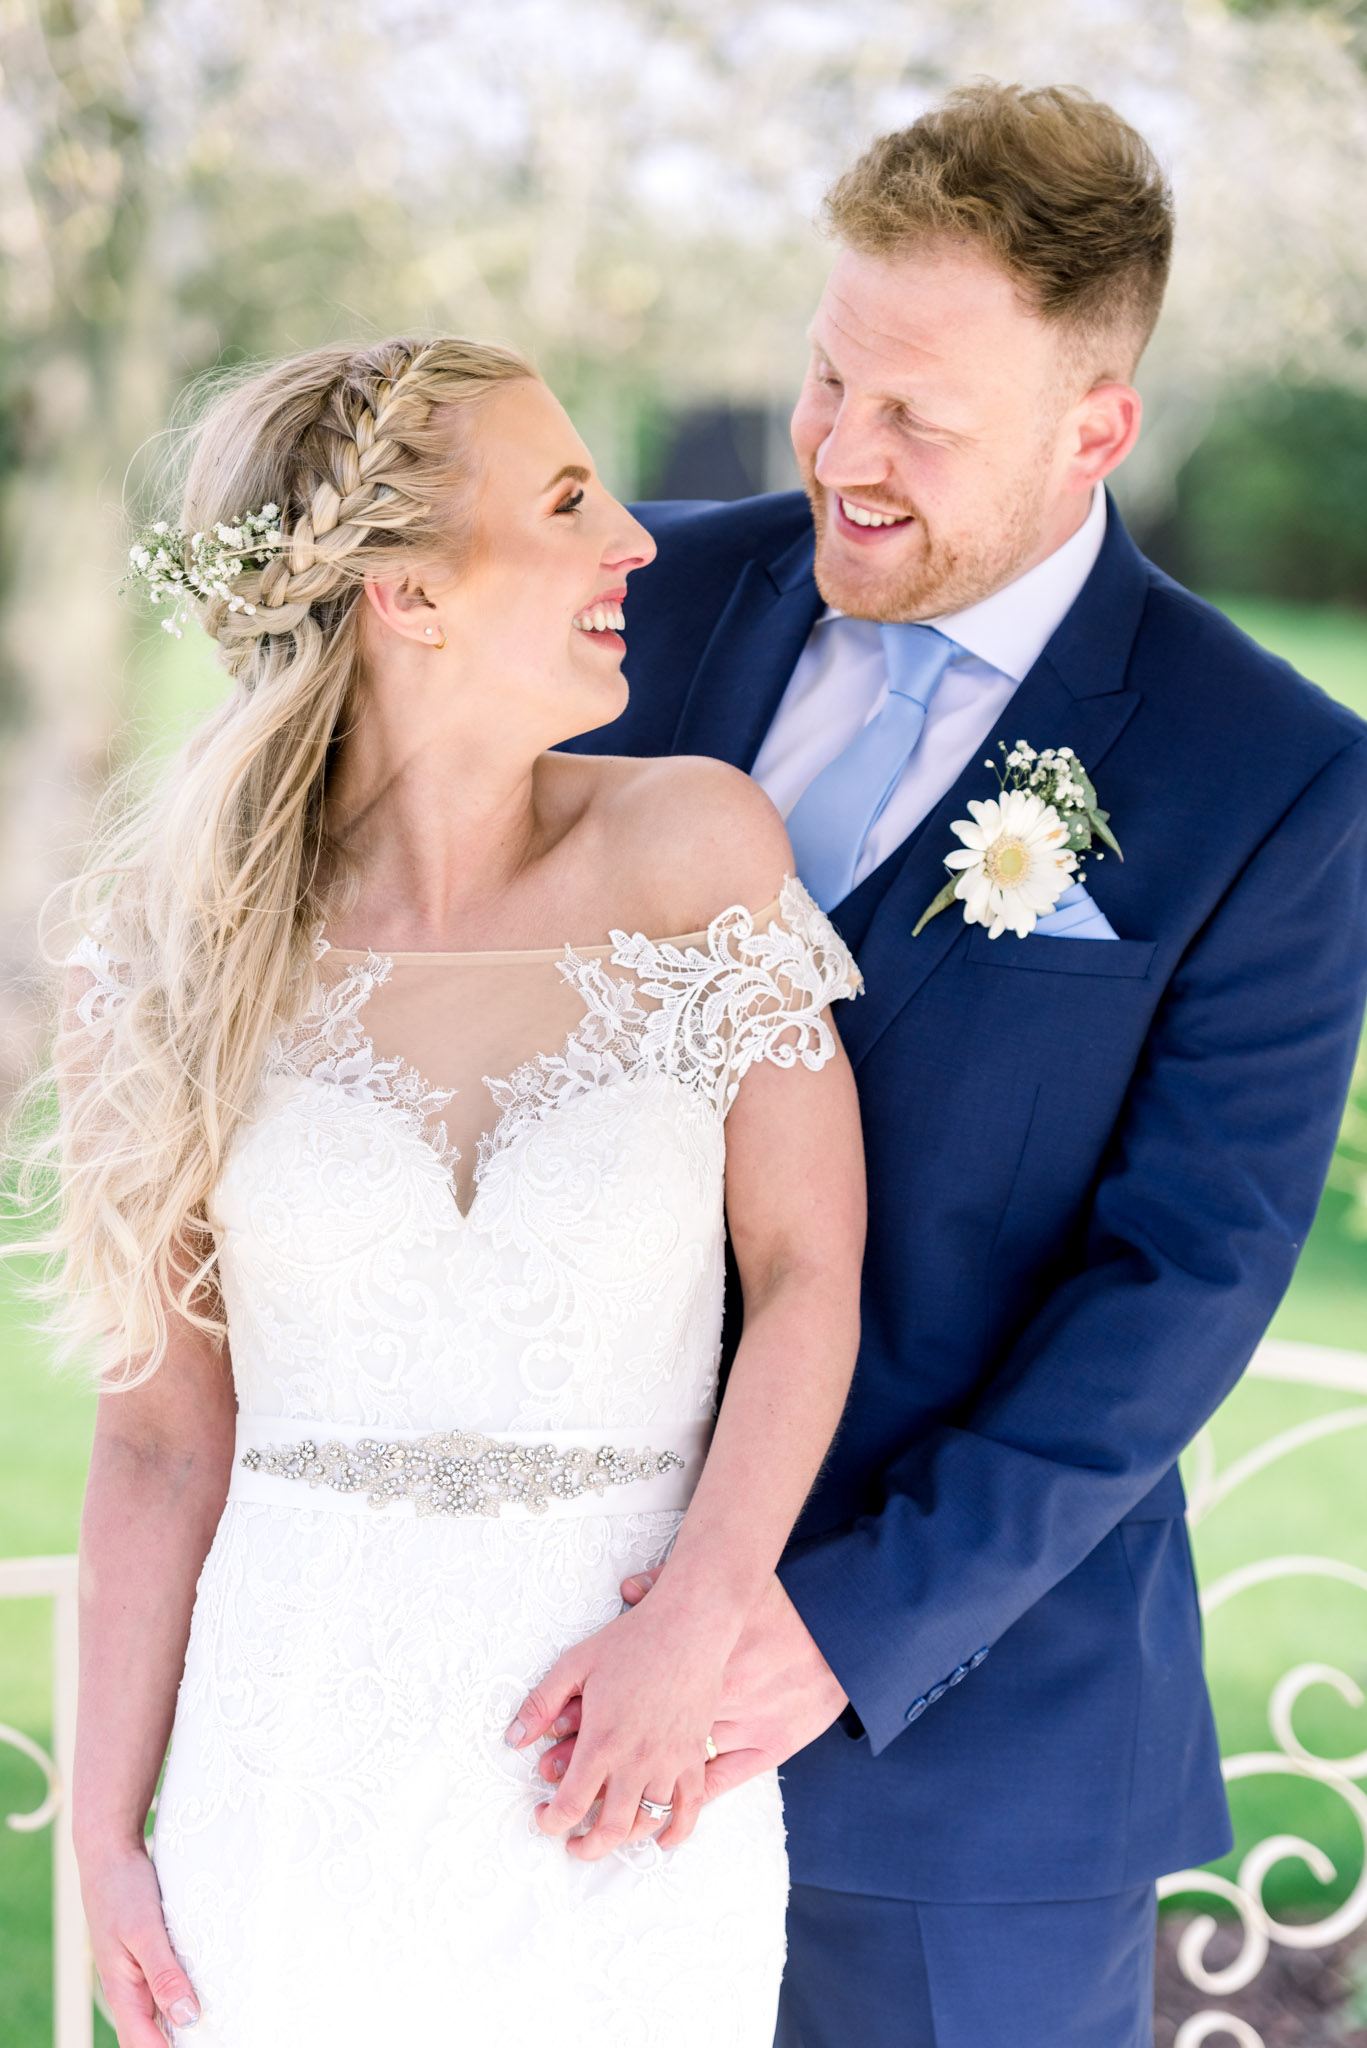 https://usercontent.one/wp/www.natalieandmax.co.uk/wp-content/uploads/2022/04/JE-Fennes-Wedding-Photography-by-Natalie-and-Max-Photo-and-Films-444.jpg?media=1711985334